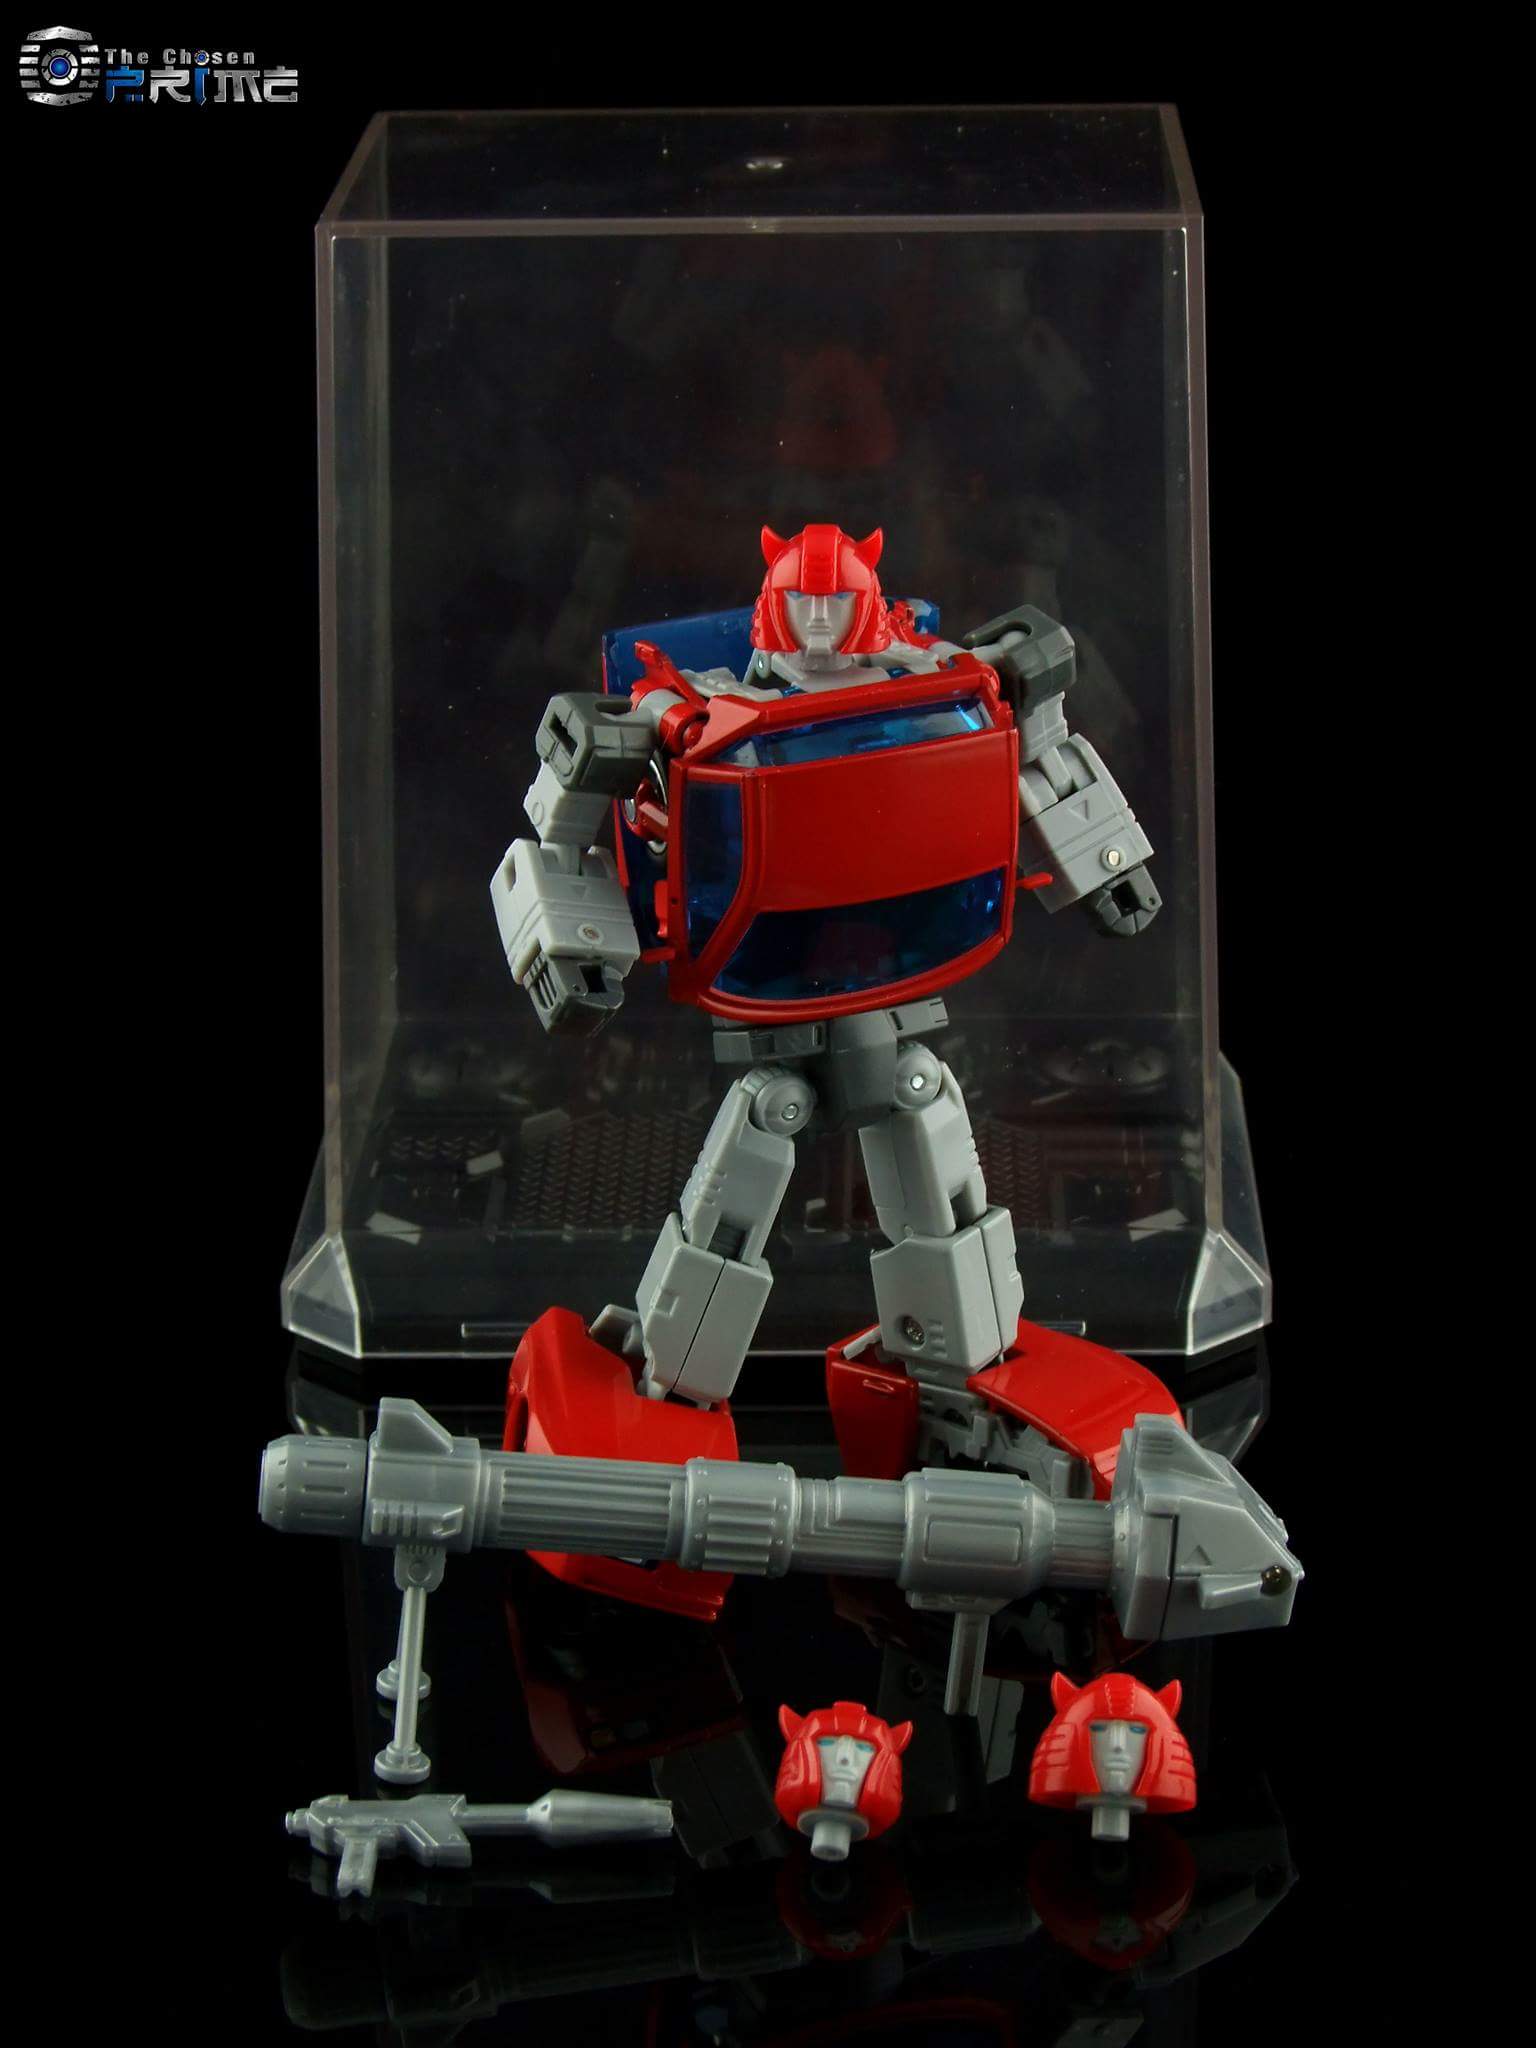 [ACE Collectables] Produit Tiers - Minibots MP - ACE-01 Tumbler (aka Cliffjumper/Matamore), ACE-02 Hiccups (aka Hubcap/Virevolto), ACE-03 Trident (aka Seaspray/Embruns) G0Ch4044